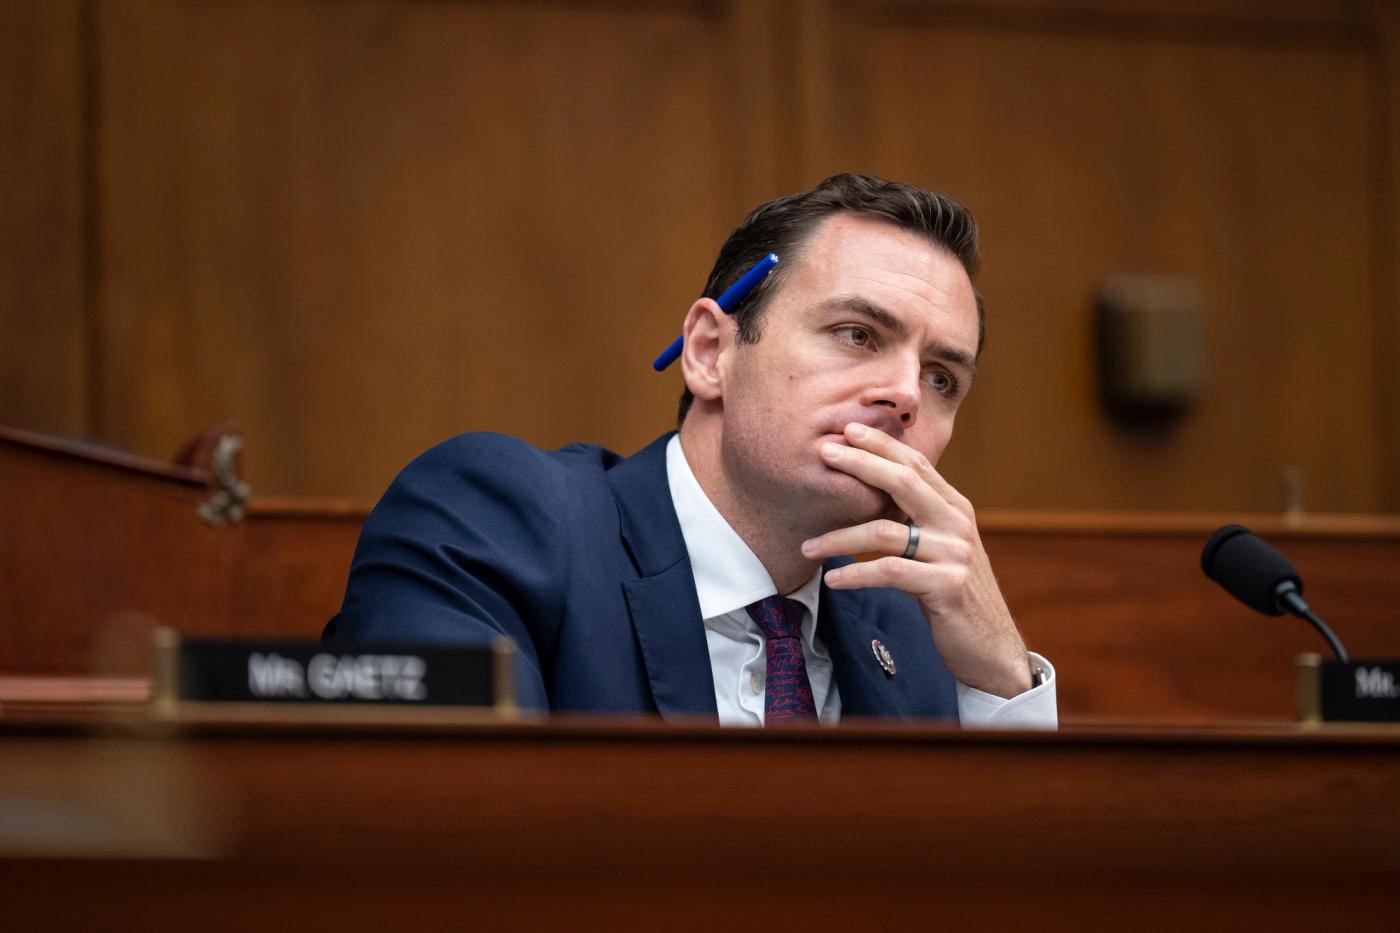 Rep. Mike Gallagher, R-Wis., the chairman of the House select committee on China, listens during a congressional hearing